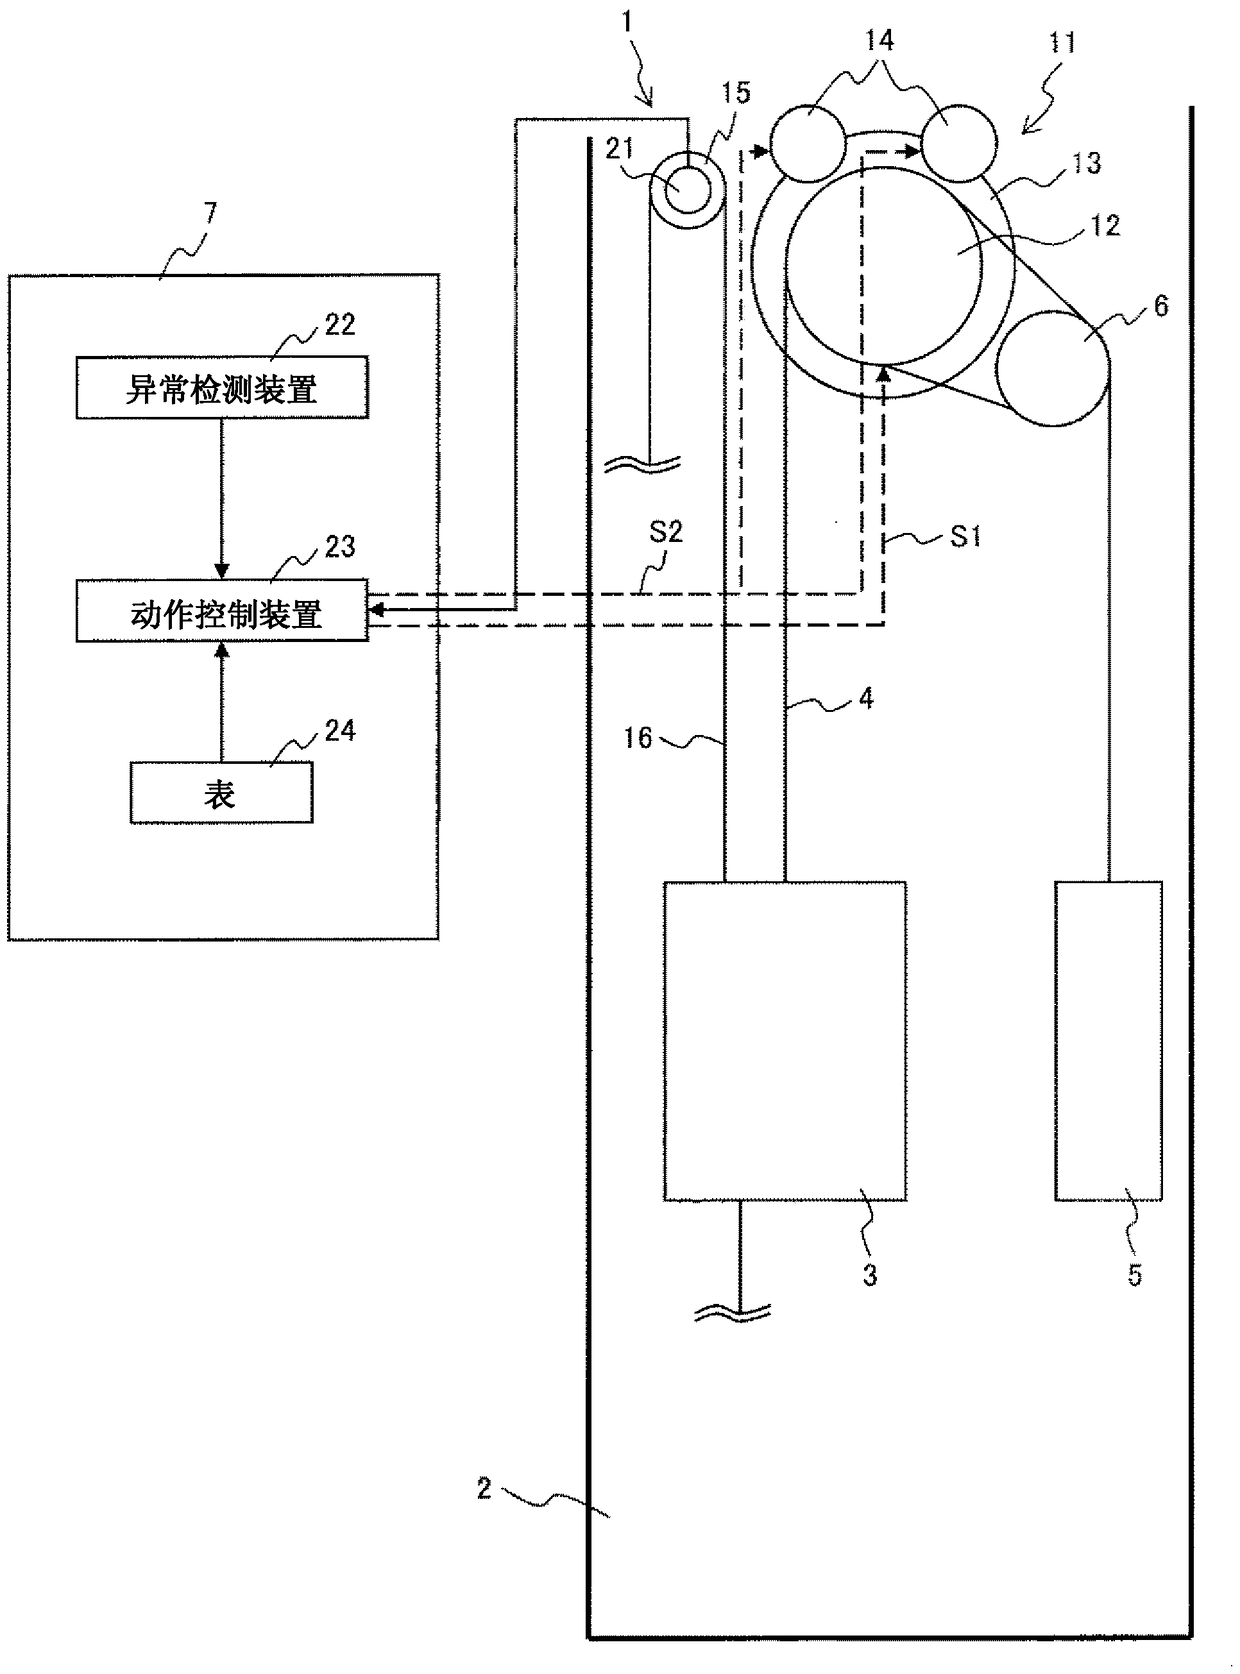 Control devices for elevator installations and elevator installations